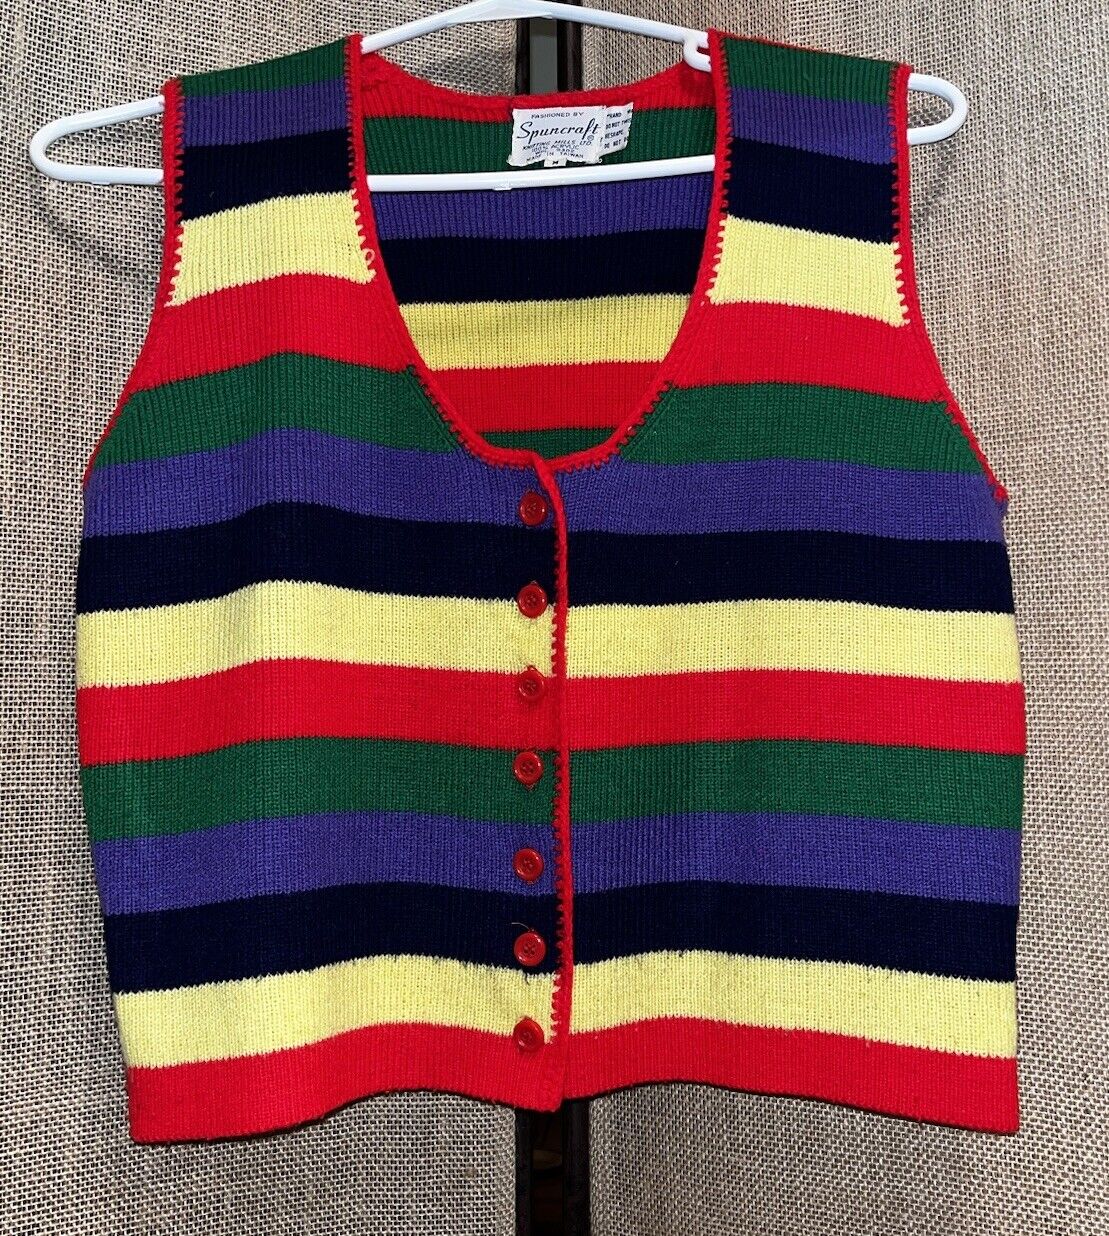 Vintage Sz Medium Spuncraft Knitted Stripped Sweater Very Groovy